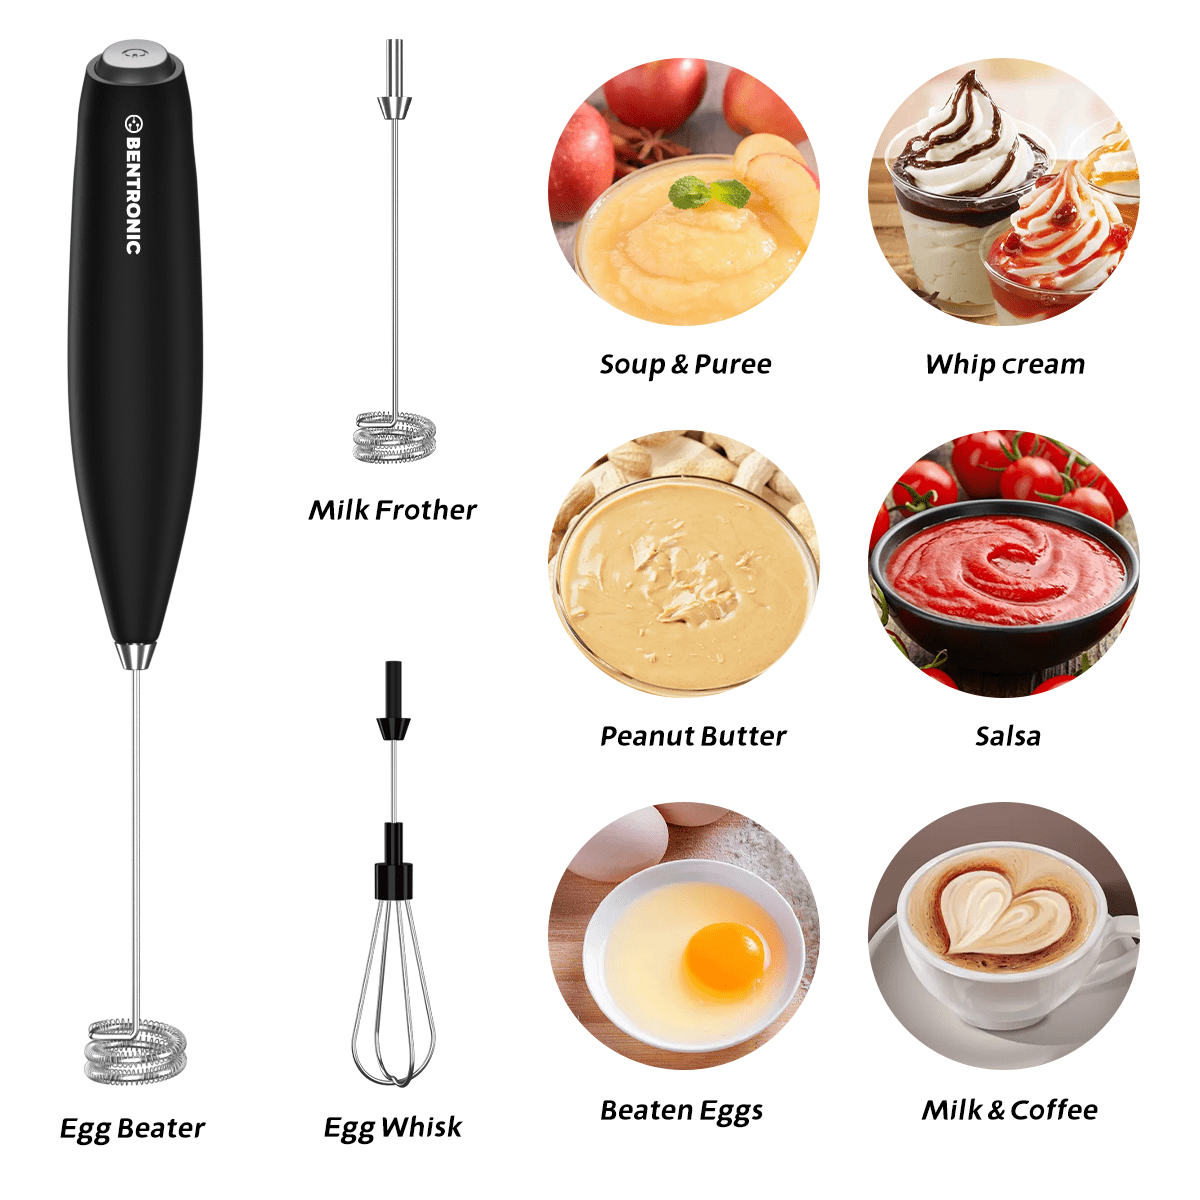 Jjyy 1pc/2pcs Frother Electric Milk Mixer Drink Foamer Coffee Egg Beater  Whisk Latte Stirrer Stonego Baking Kitchen Accessories